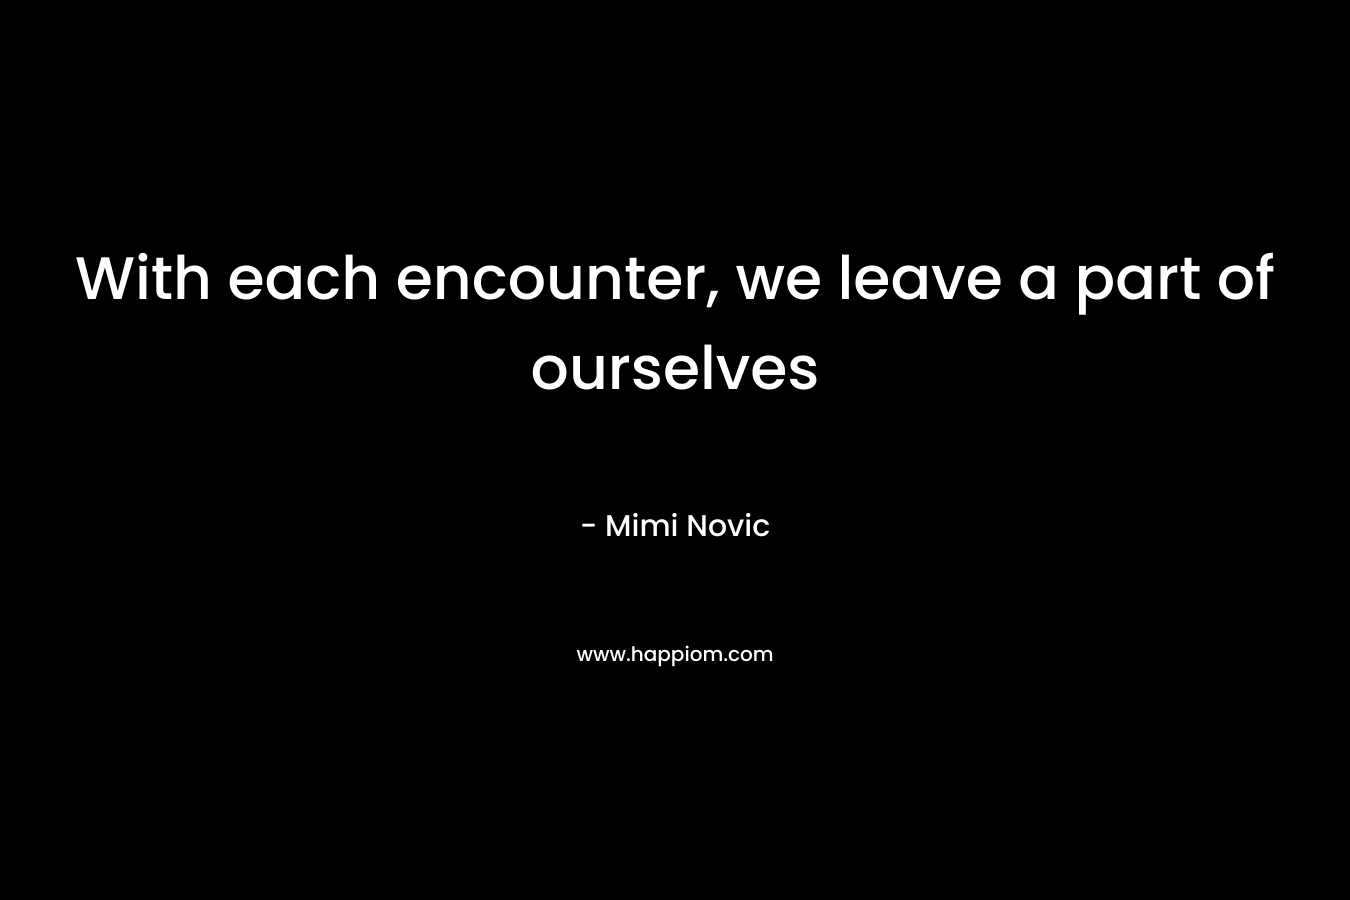 With each encounter, we leave a part of ourselves